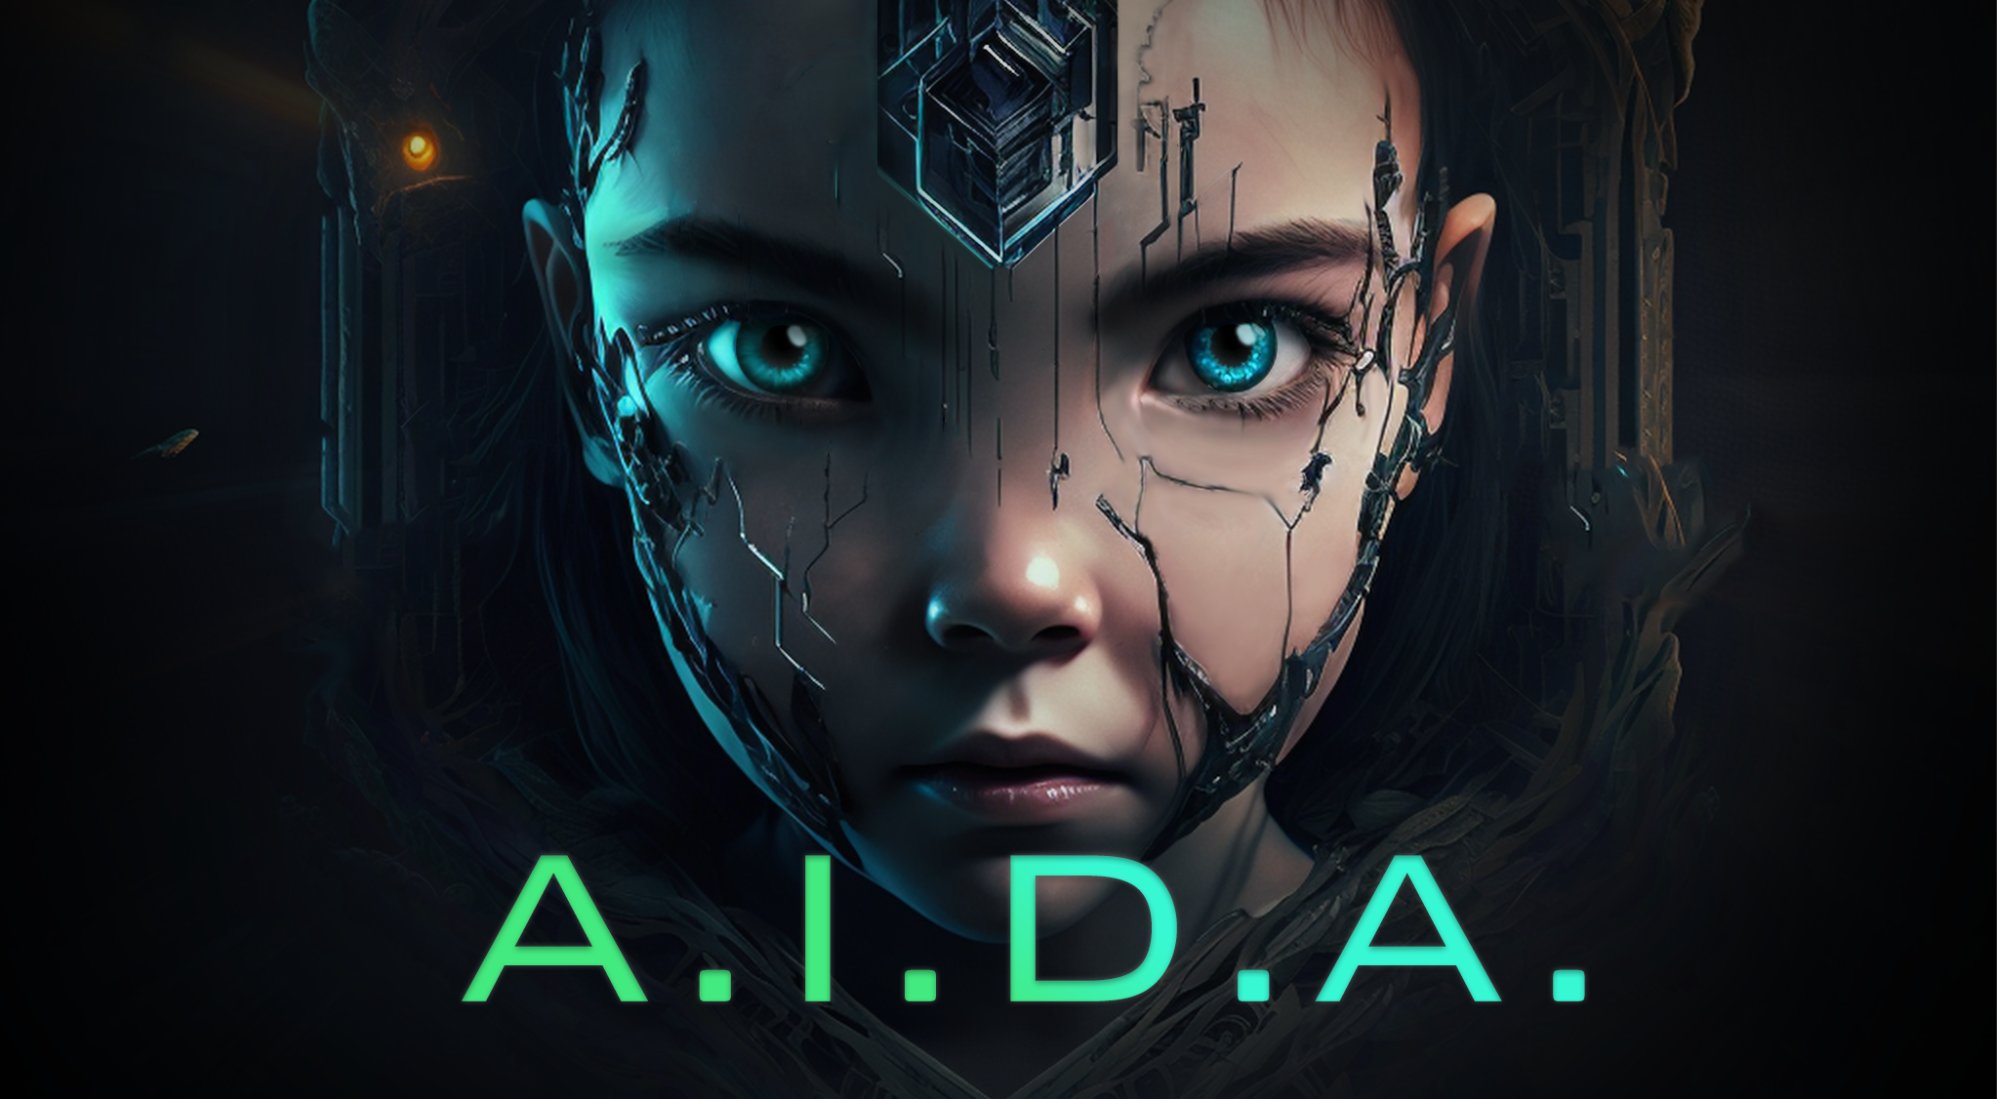 Project A.I.D.A. announced, new sci-fi survival horror game